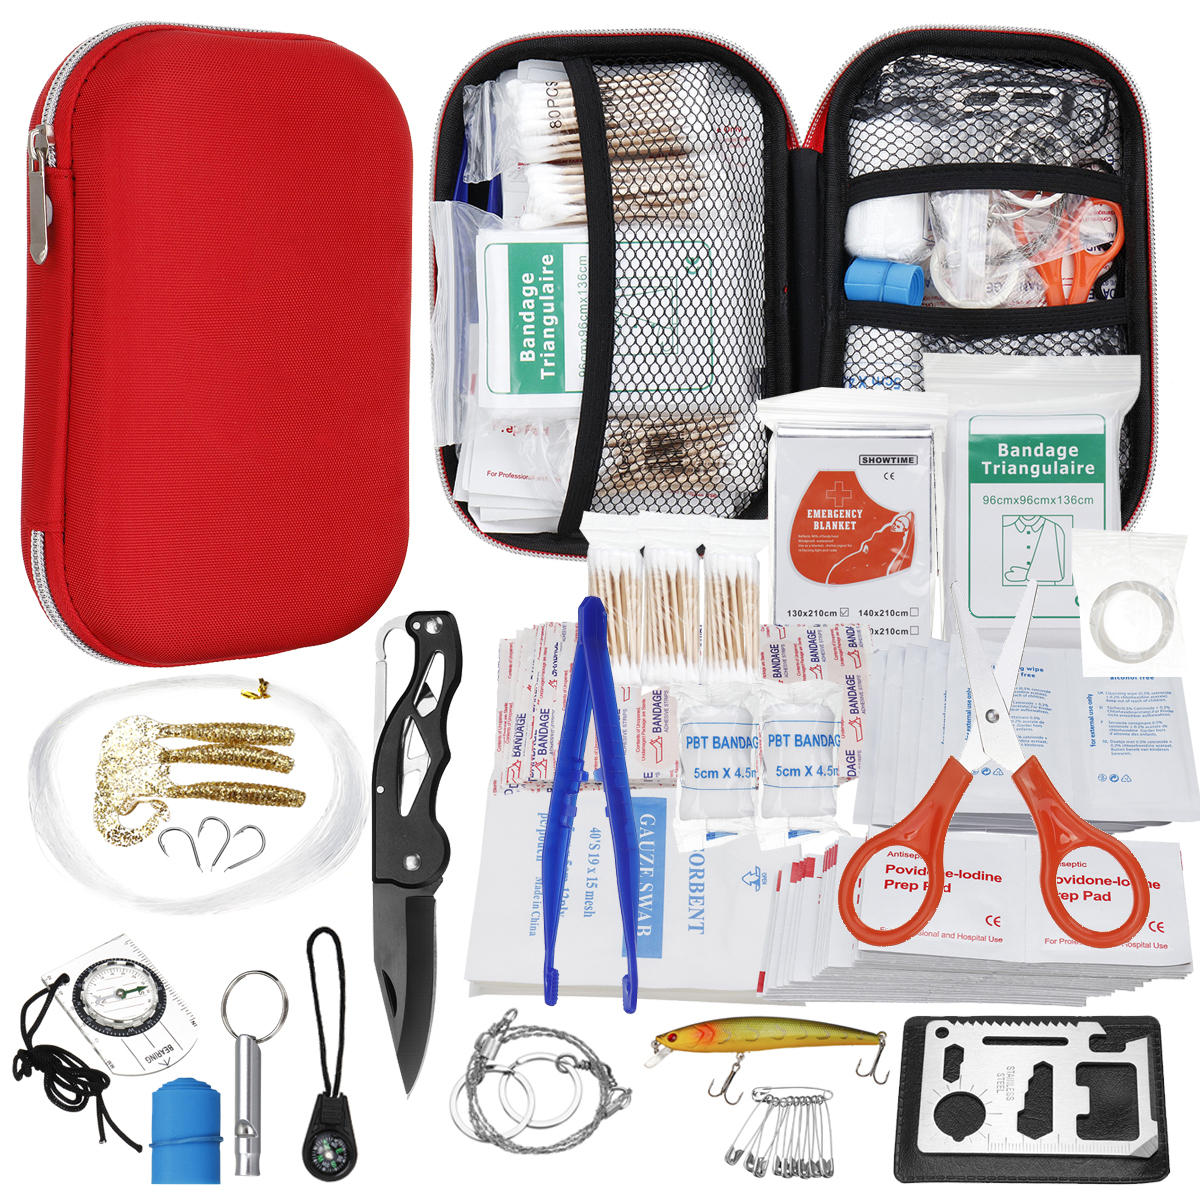 Full 304PCS Outdoor Emergency Survival Kit Gear Medical Bag for Home Office Car Boat Camping Hiking